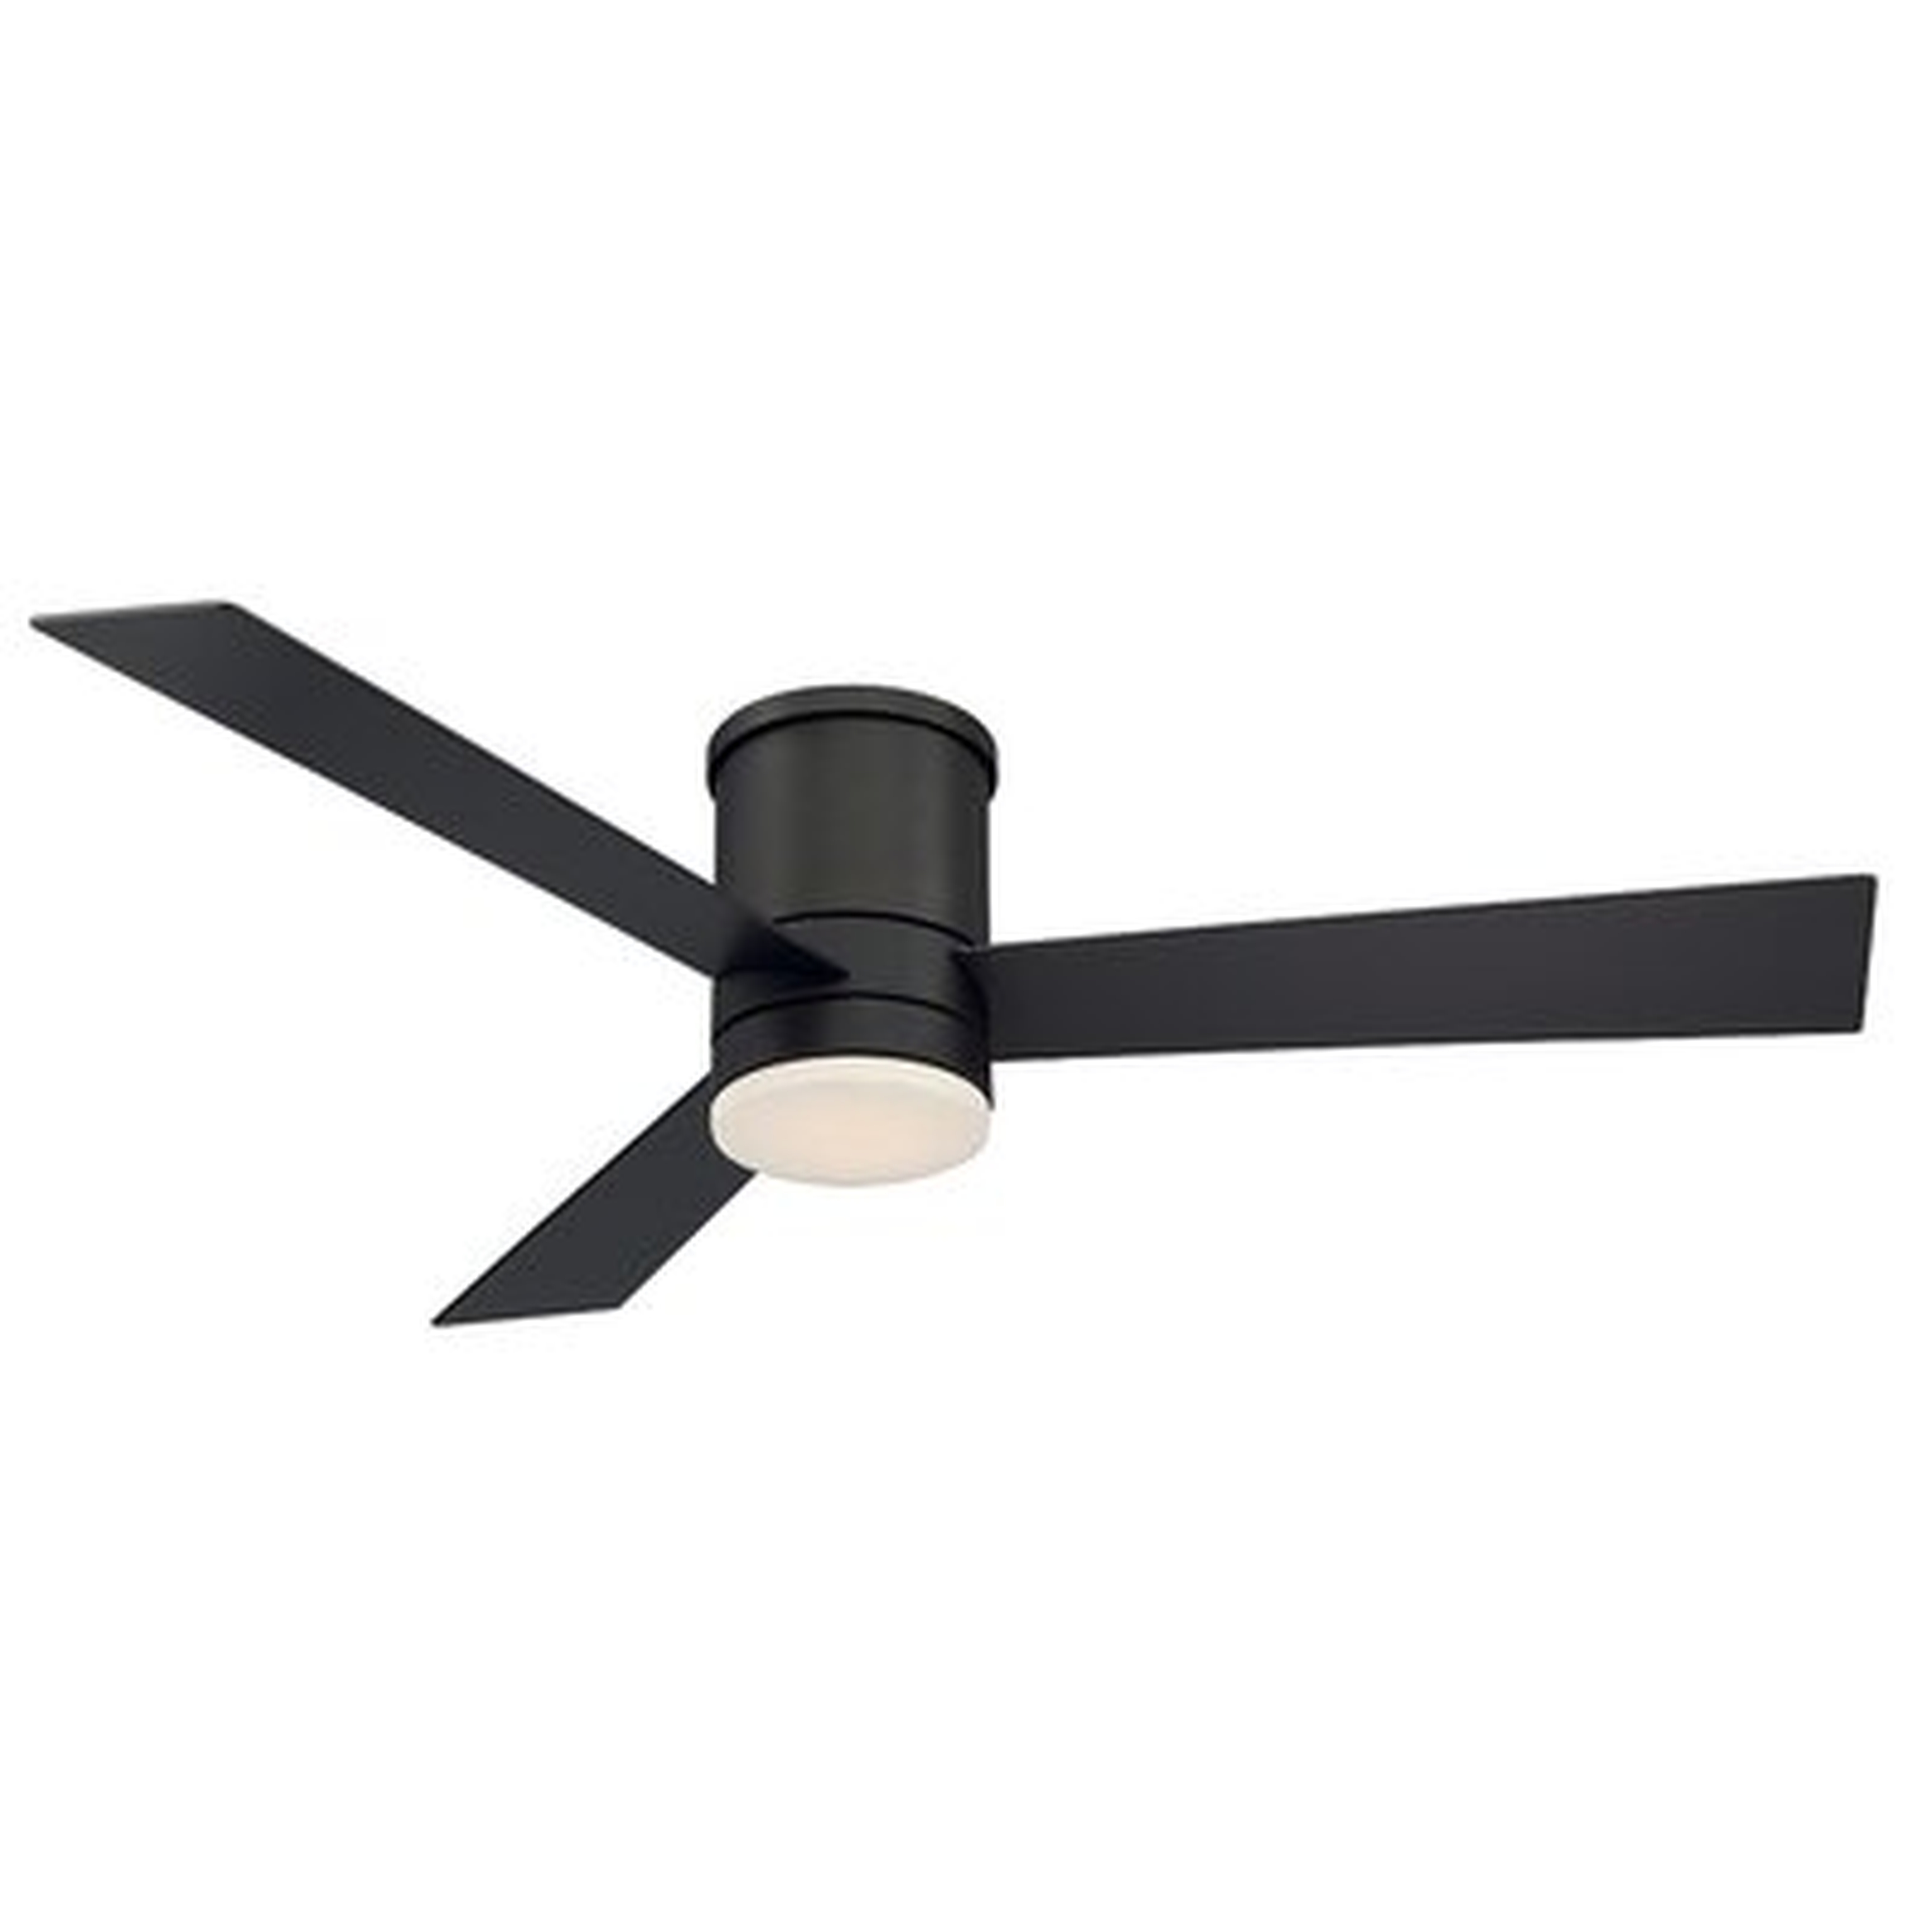 52" Axis 3 - Blade LED Smart Flush Mount Ceiling Fan with Remote Control and Light Kit Included - AllModern